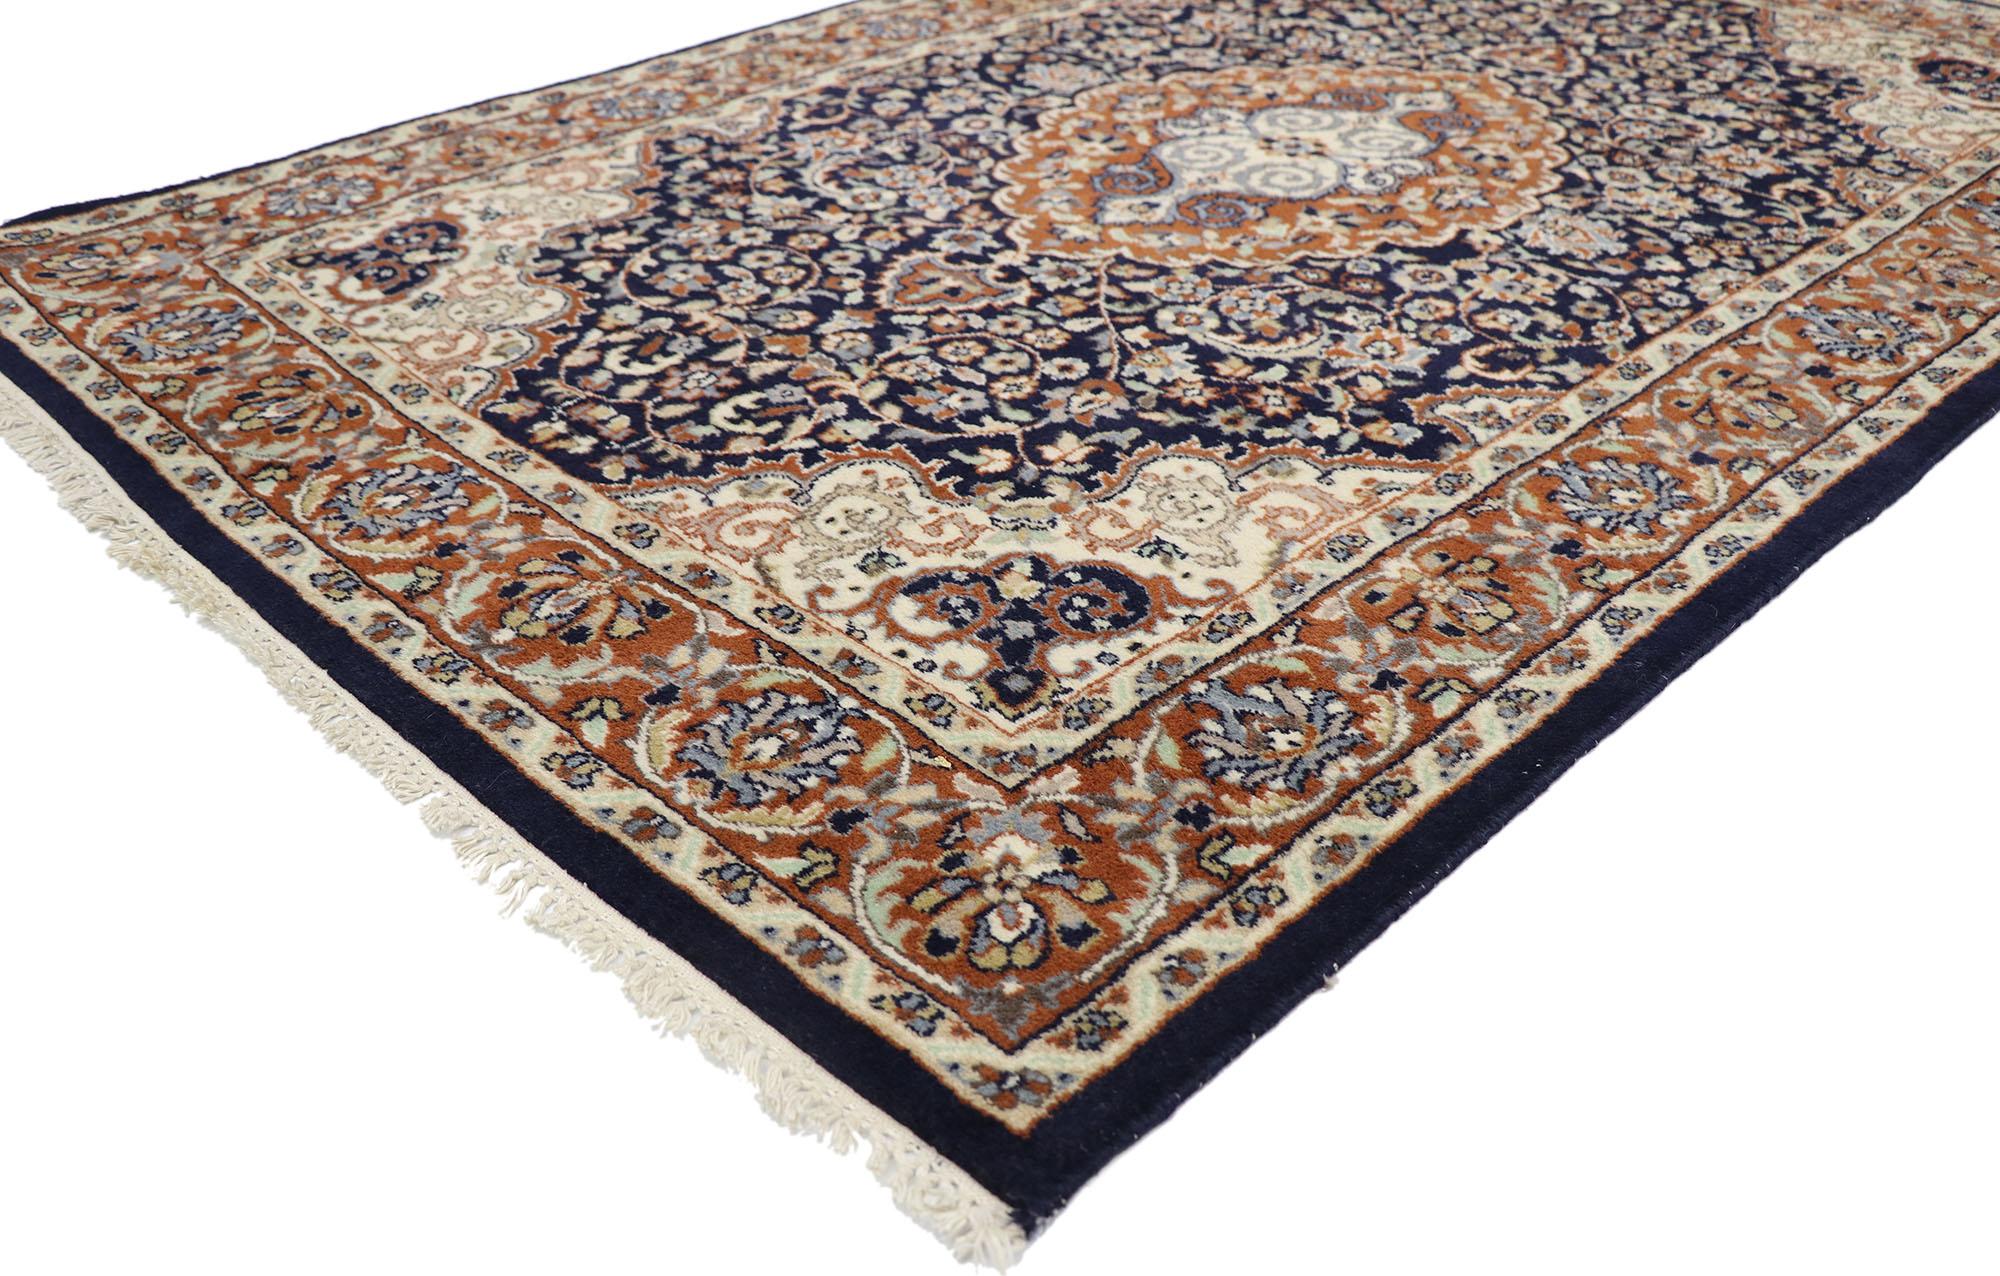 78087 vintage Indian rug with Arabesque Dutch Renaissance style 04'03 x 06'05. With its effortless beauty and architectural elements of arabesque vines scrolls, this hand knotted wool vintage Indian rug beautifully embodies Dutch Renaissance style.